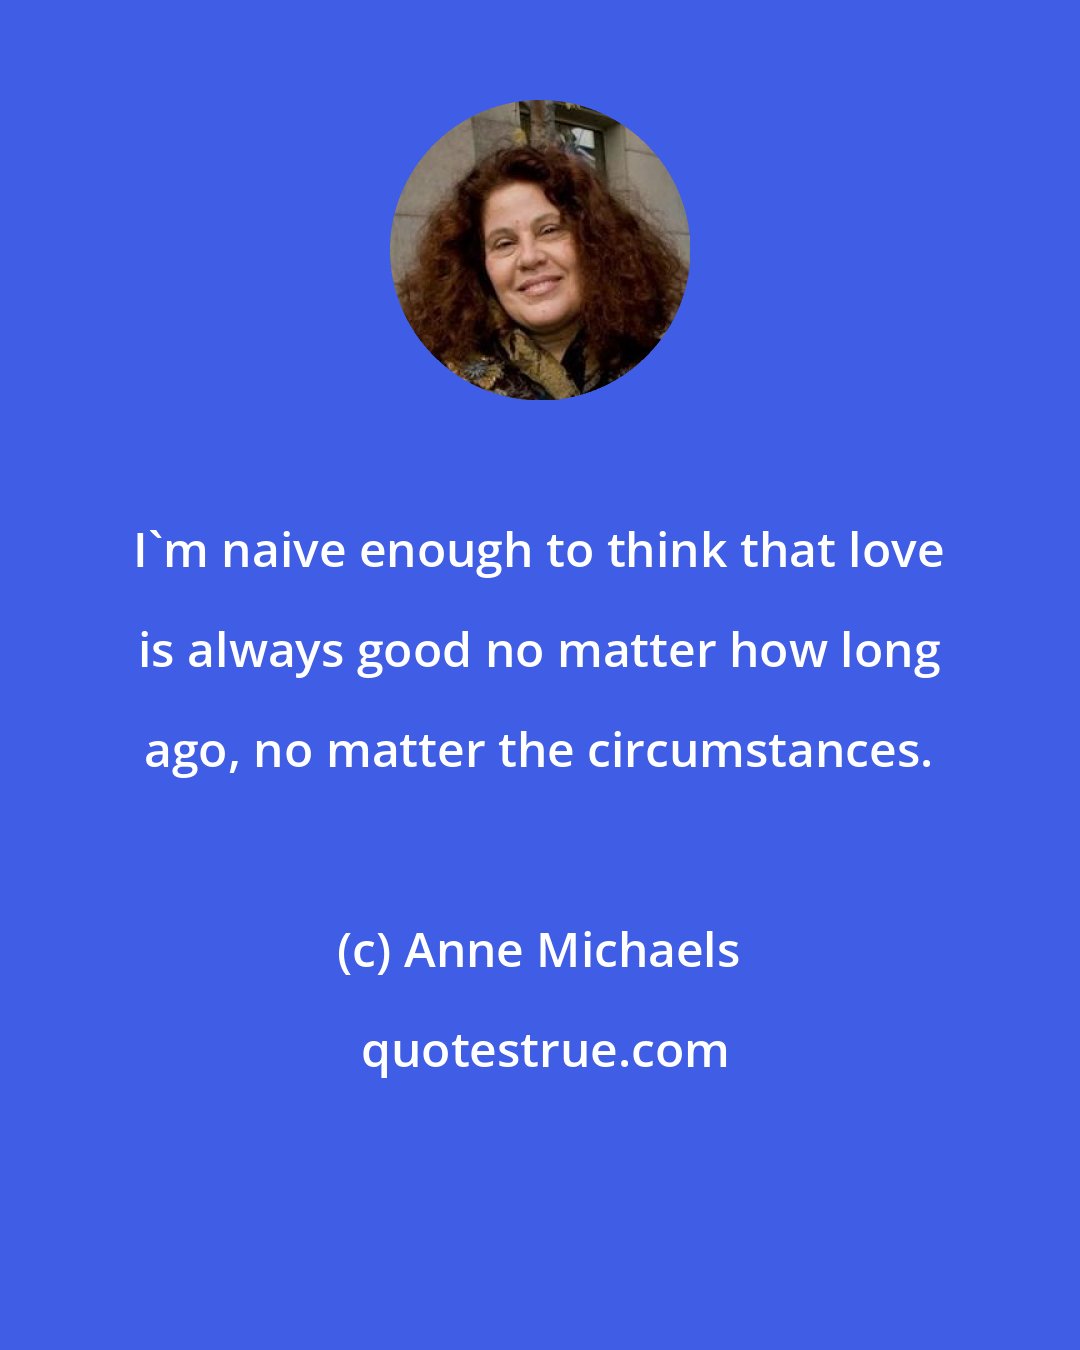 Anne Michaels: I'm naive enough to think that love is always good no matter how long ago, no matter the circumstances.